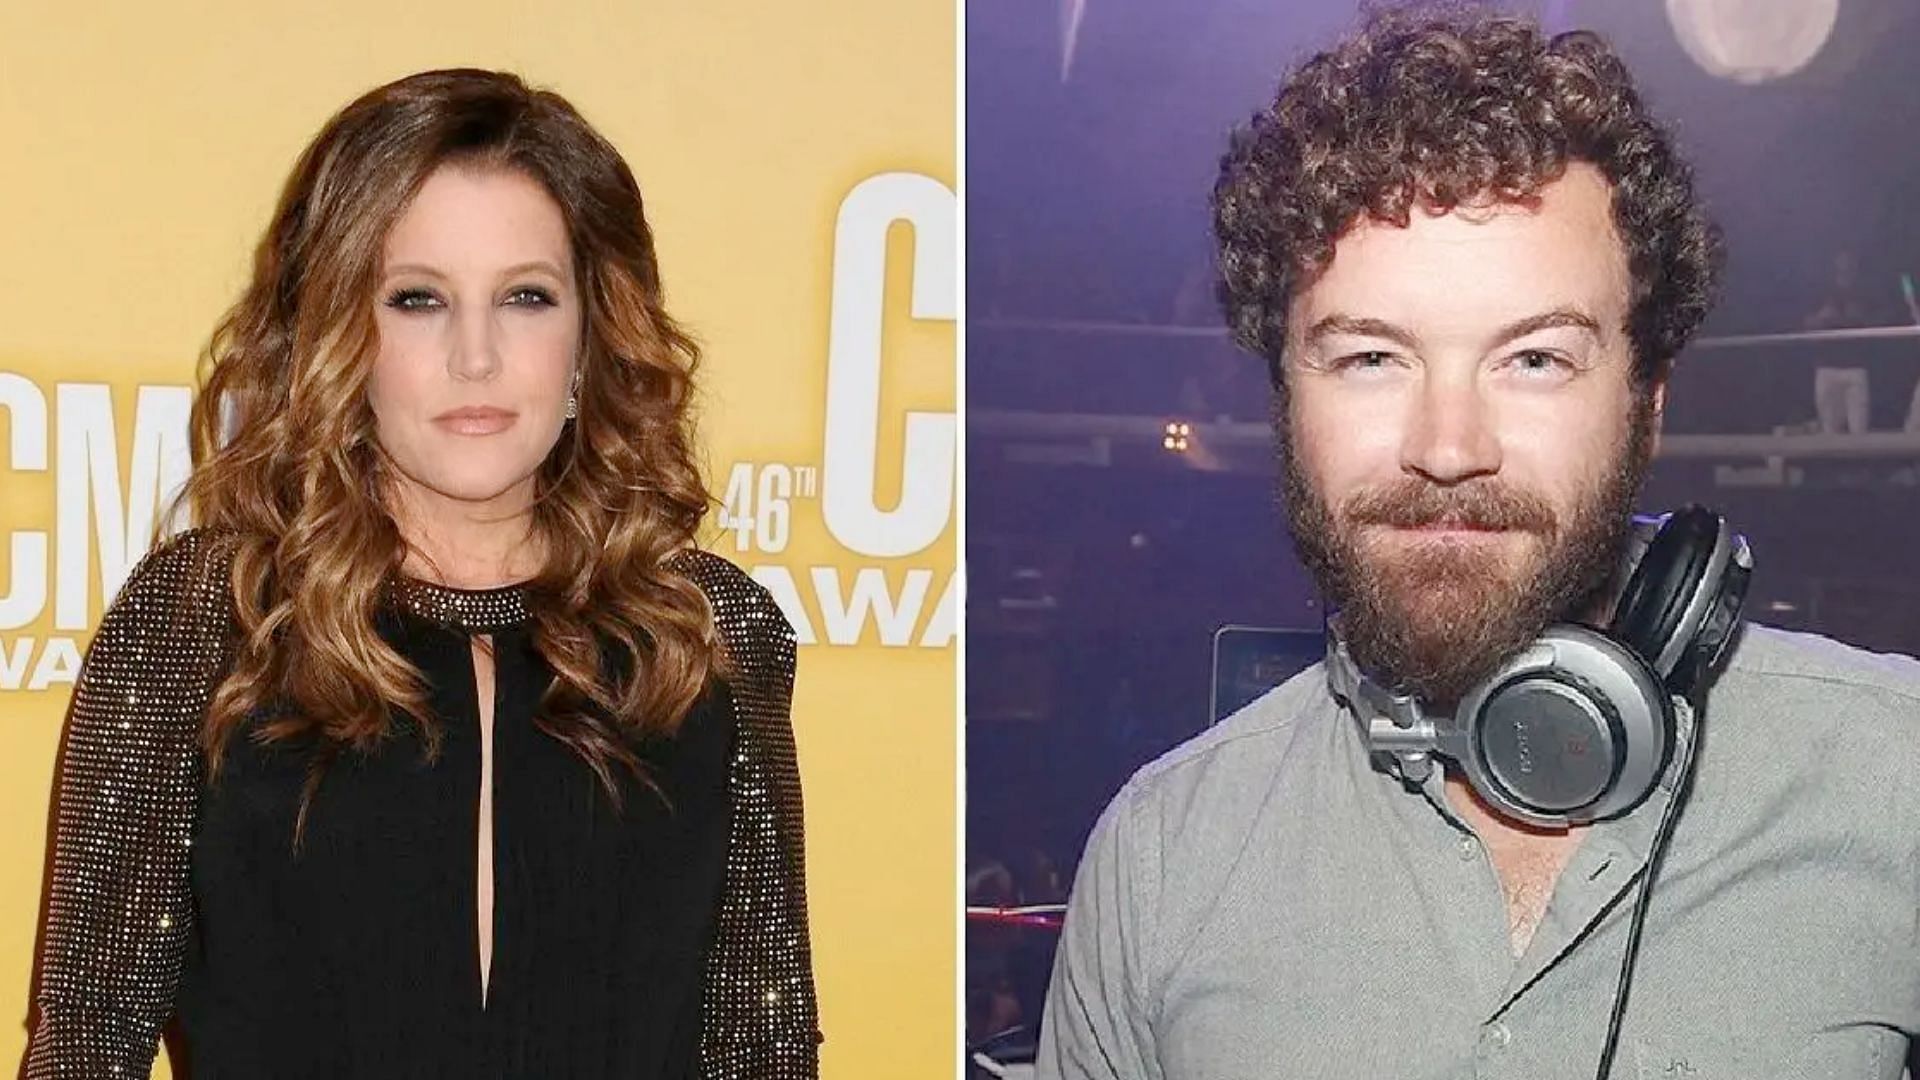 Lisa Marie Presley (L) and Danny Masterson (R) (Images via Getty)